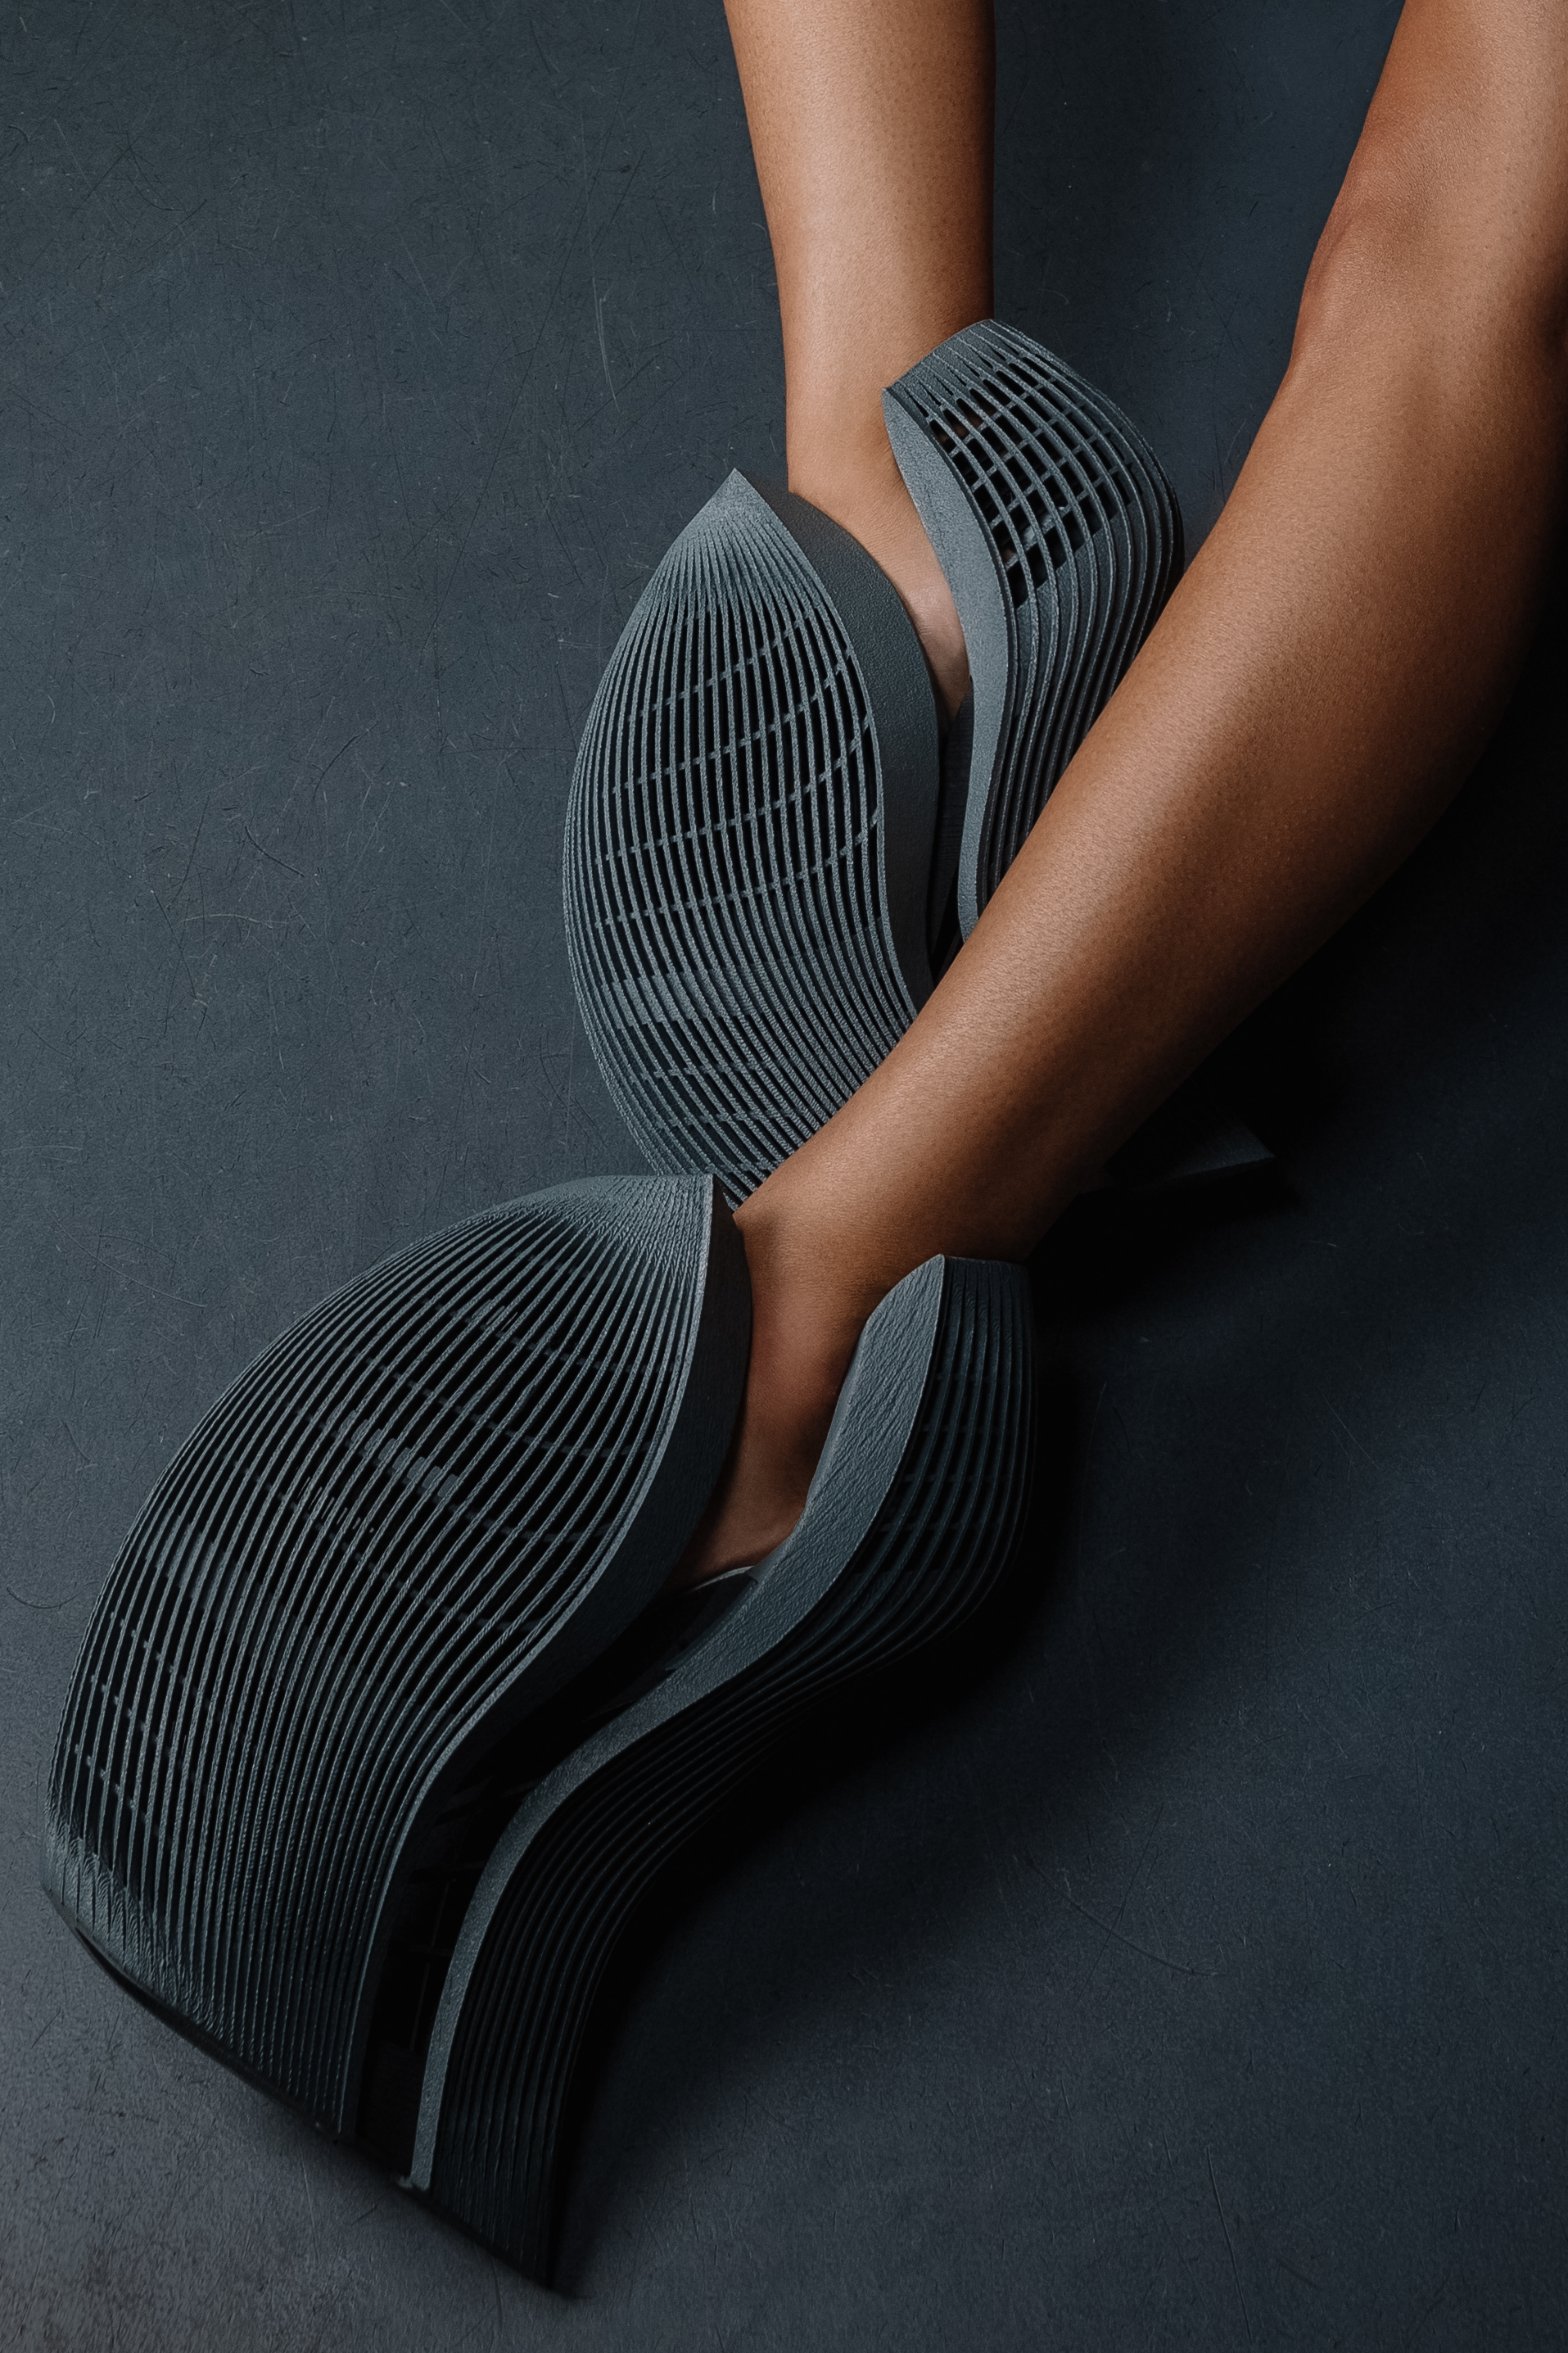 UNX2 shoes by Ben van Berkel in collaboration with United Nude